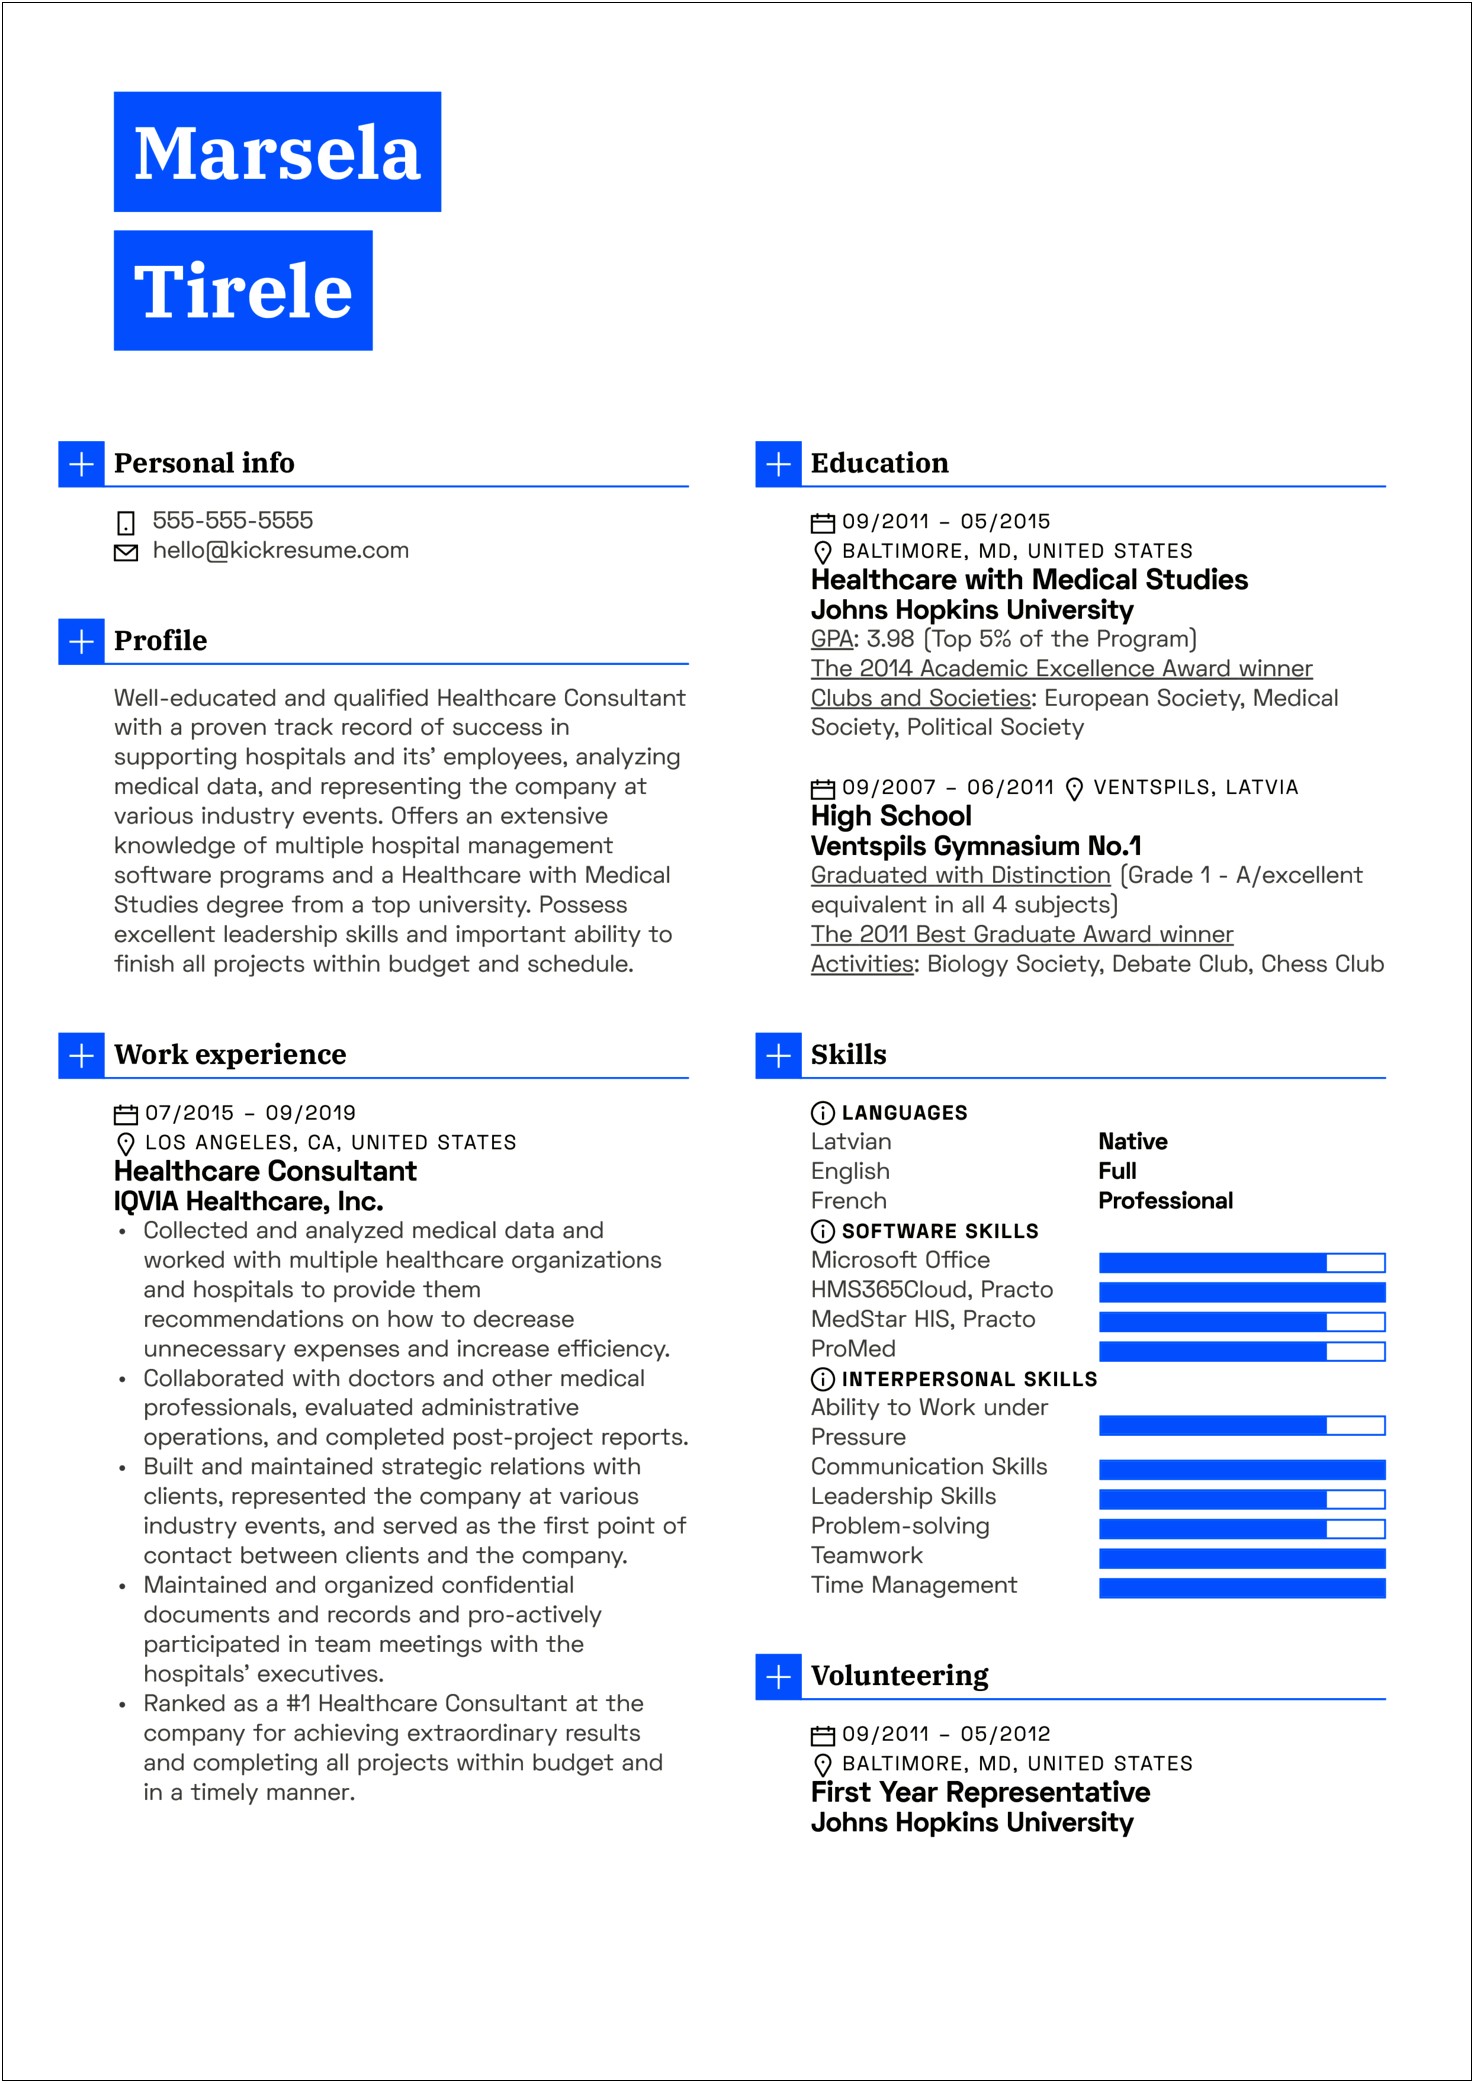 Sample Jhu Medical School Resume For Accepted Students